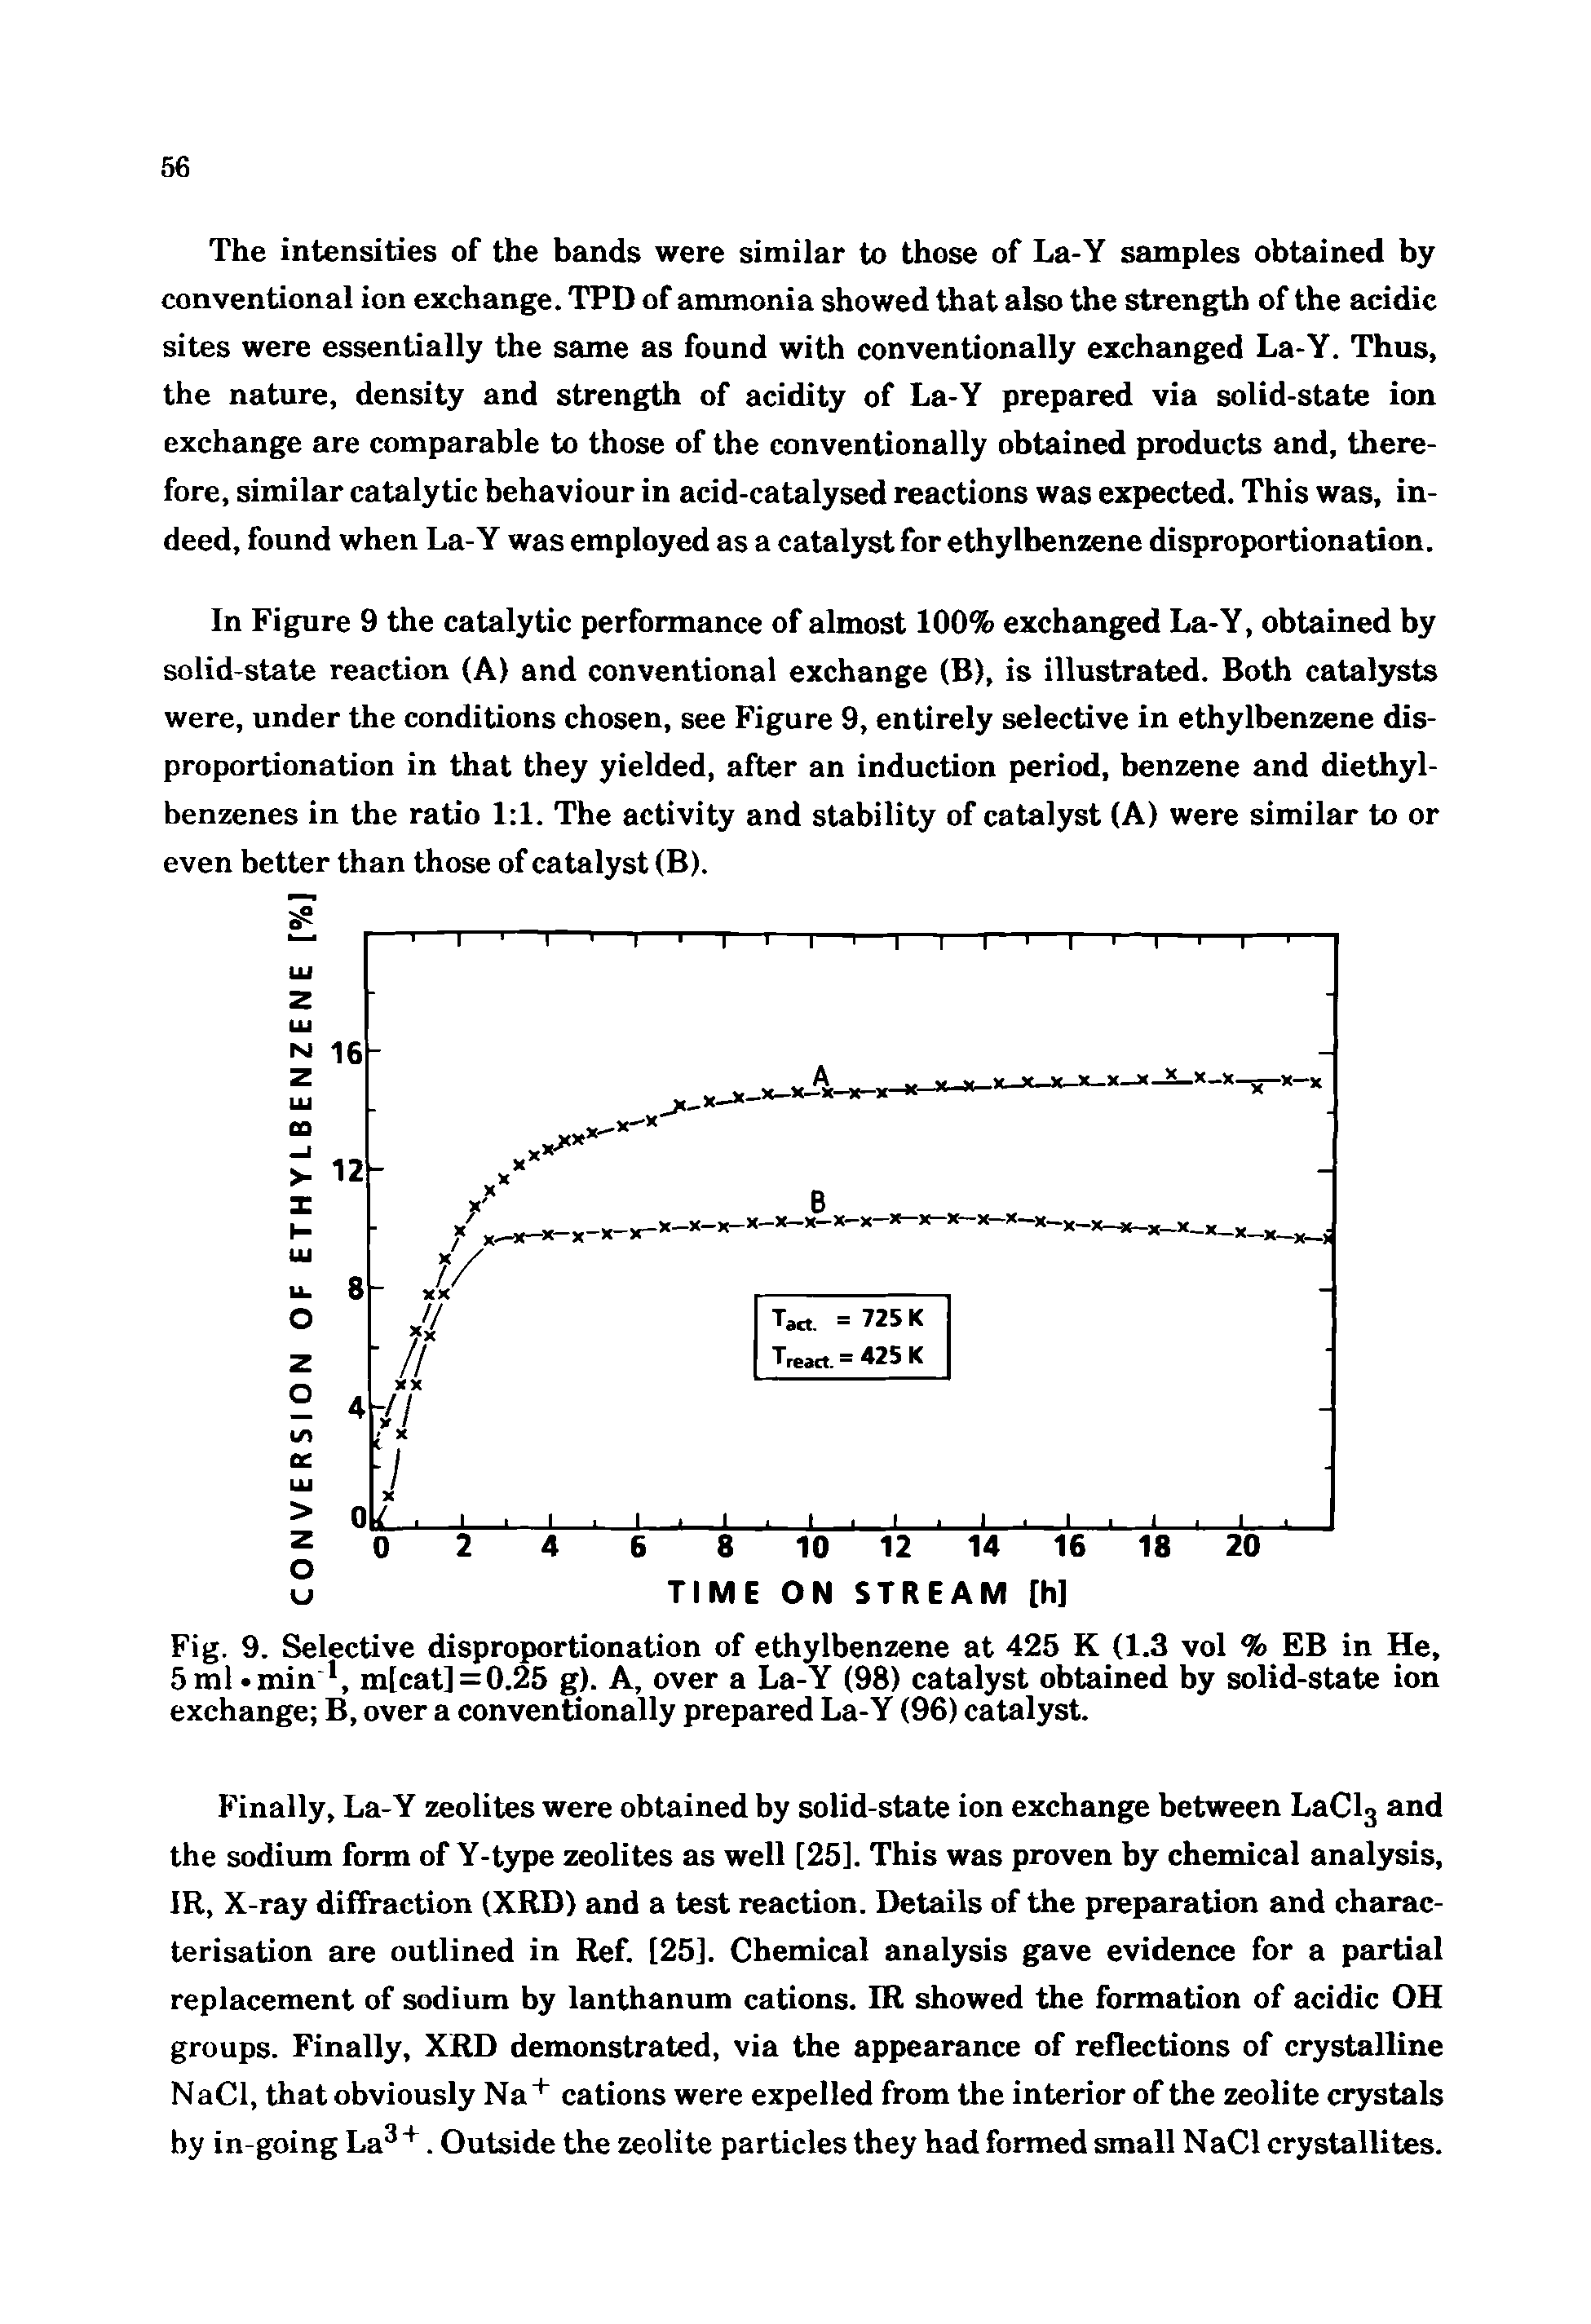 Fig. 9. Selective disproportionation of ethylbenzene at 425 K (1.3 vol % EB in He, 5ml min, m[cat] = 0.25 g). A, over a La-Y (98) catalyst obtained by solid-state ion exchange B, over a conventionally prepared La-Y (96) catalyst.